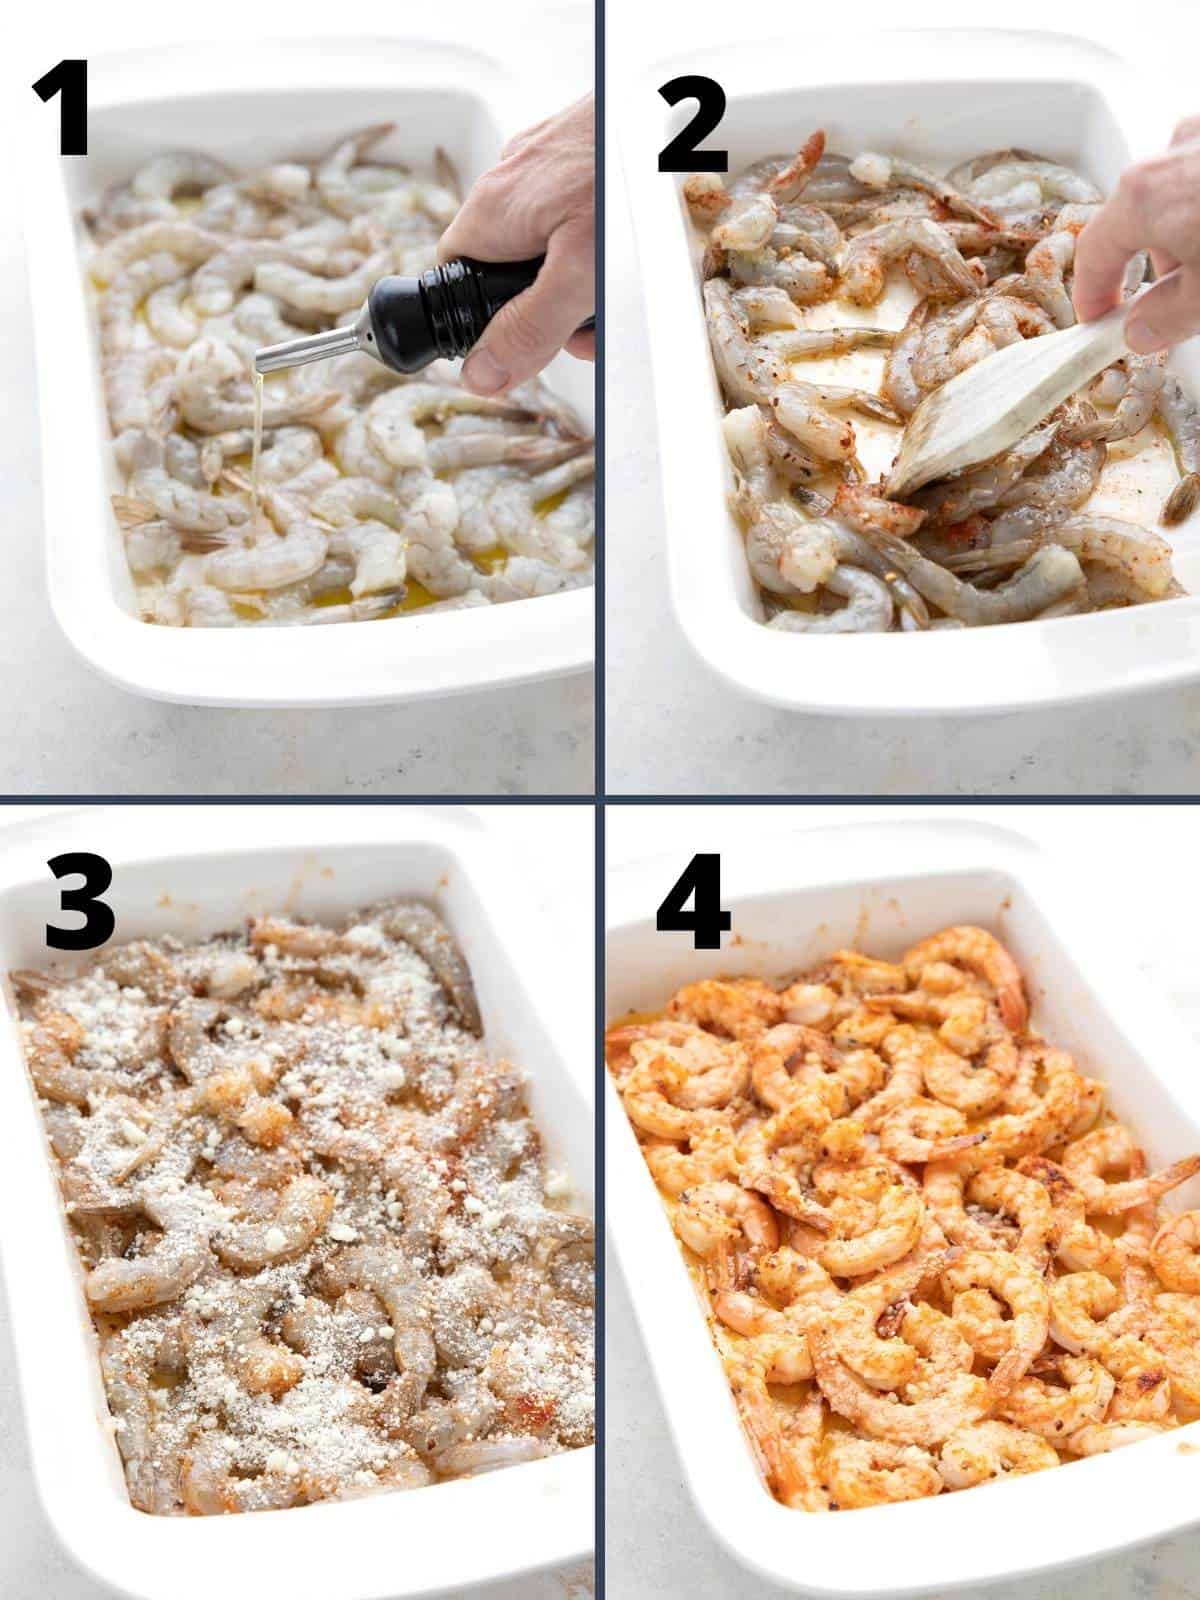 A collage of four images showing the steps for making Baked Shrimp.